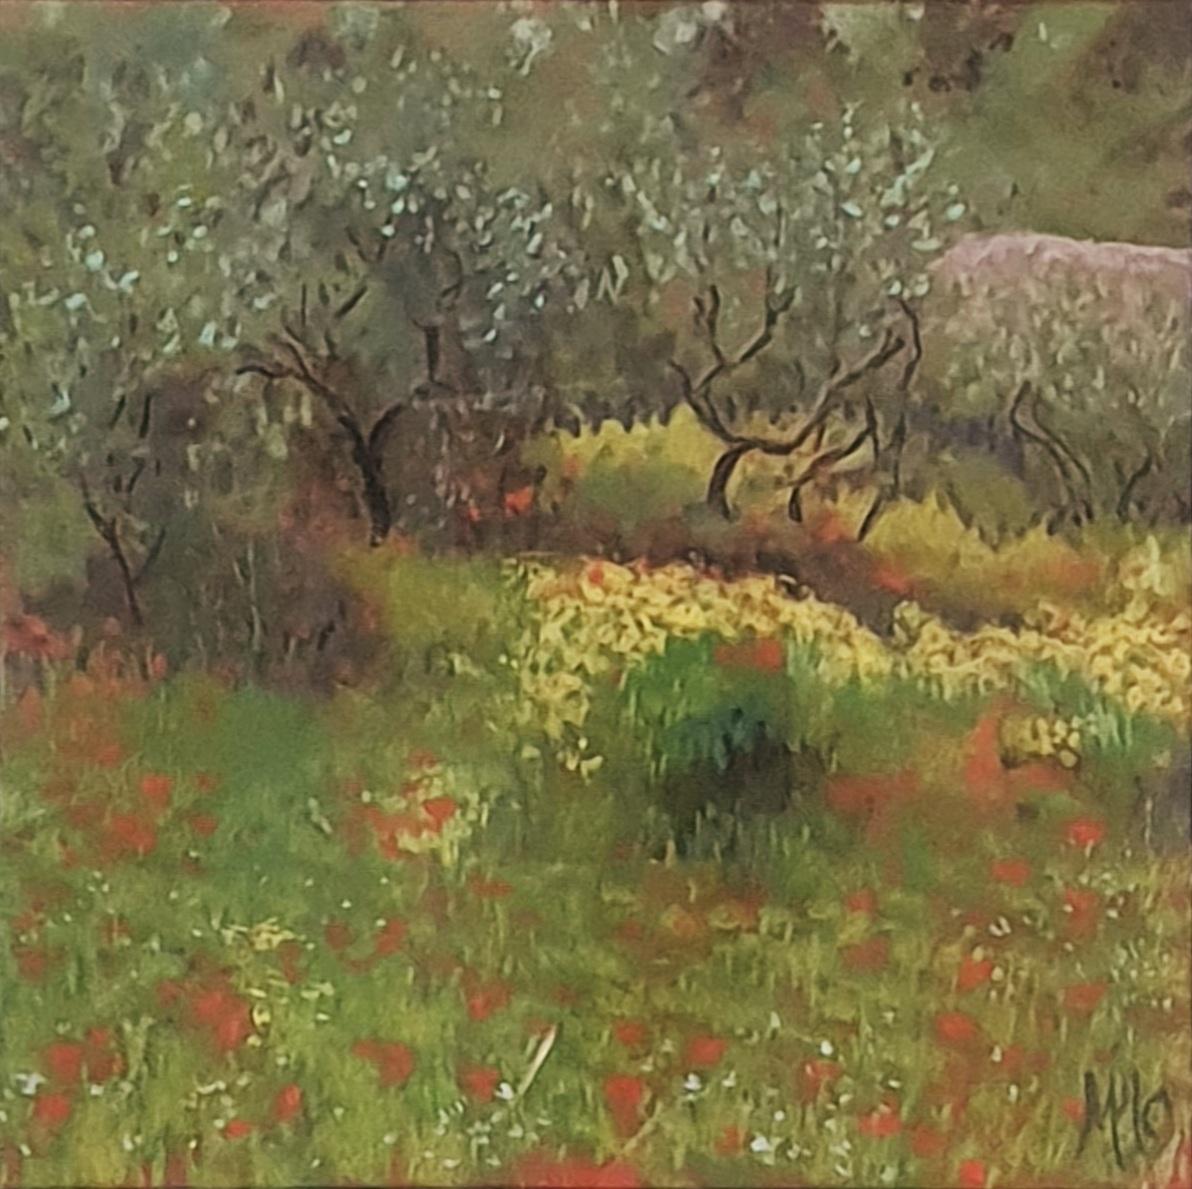 Miranda McArthur  Landscape Painting - Olive Grove and Poppies, Contemporary Impressionist Pastel on Paper.